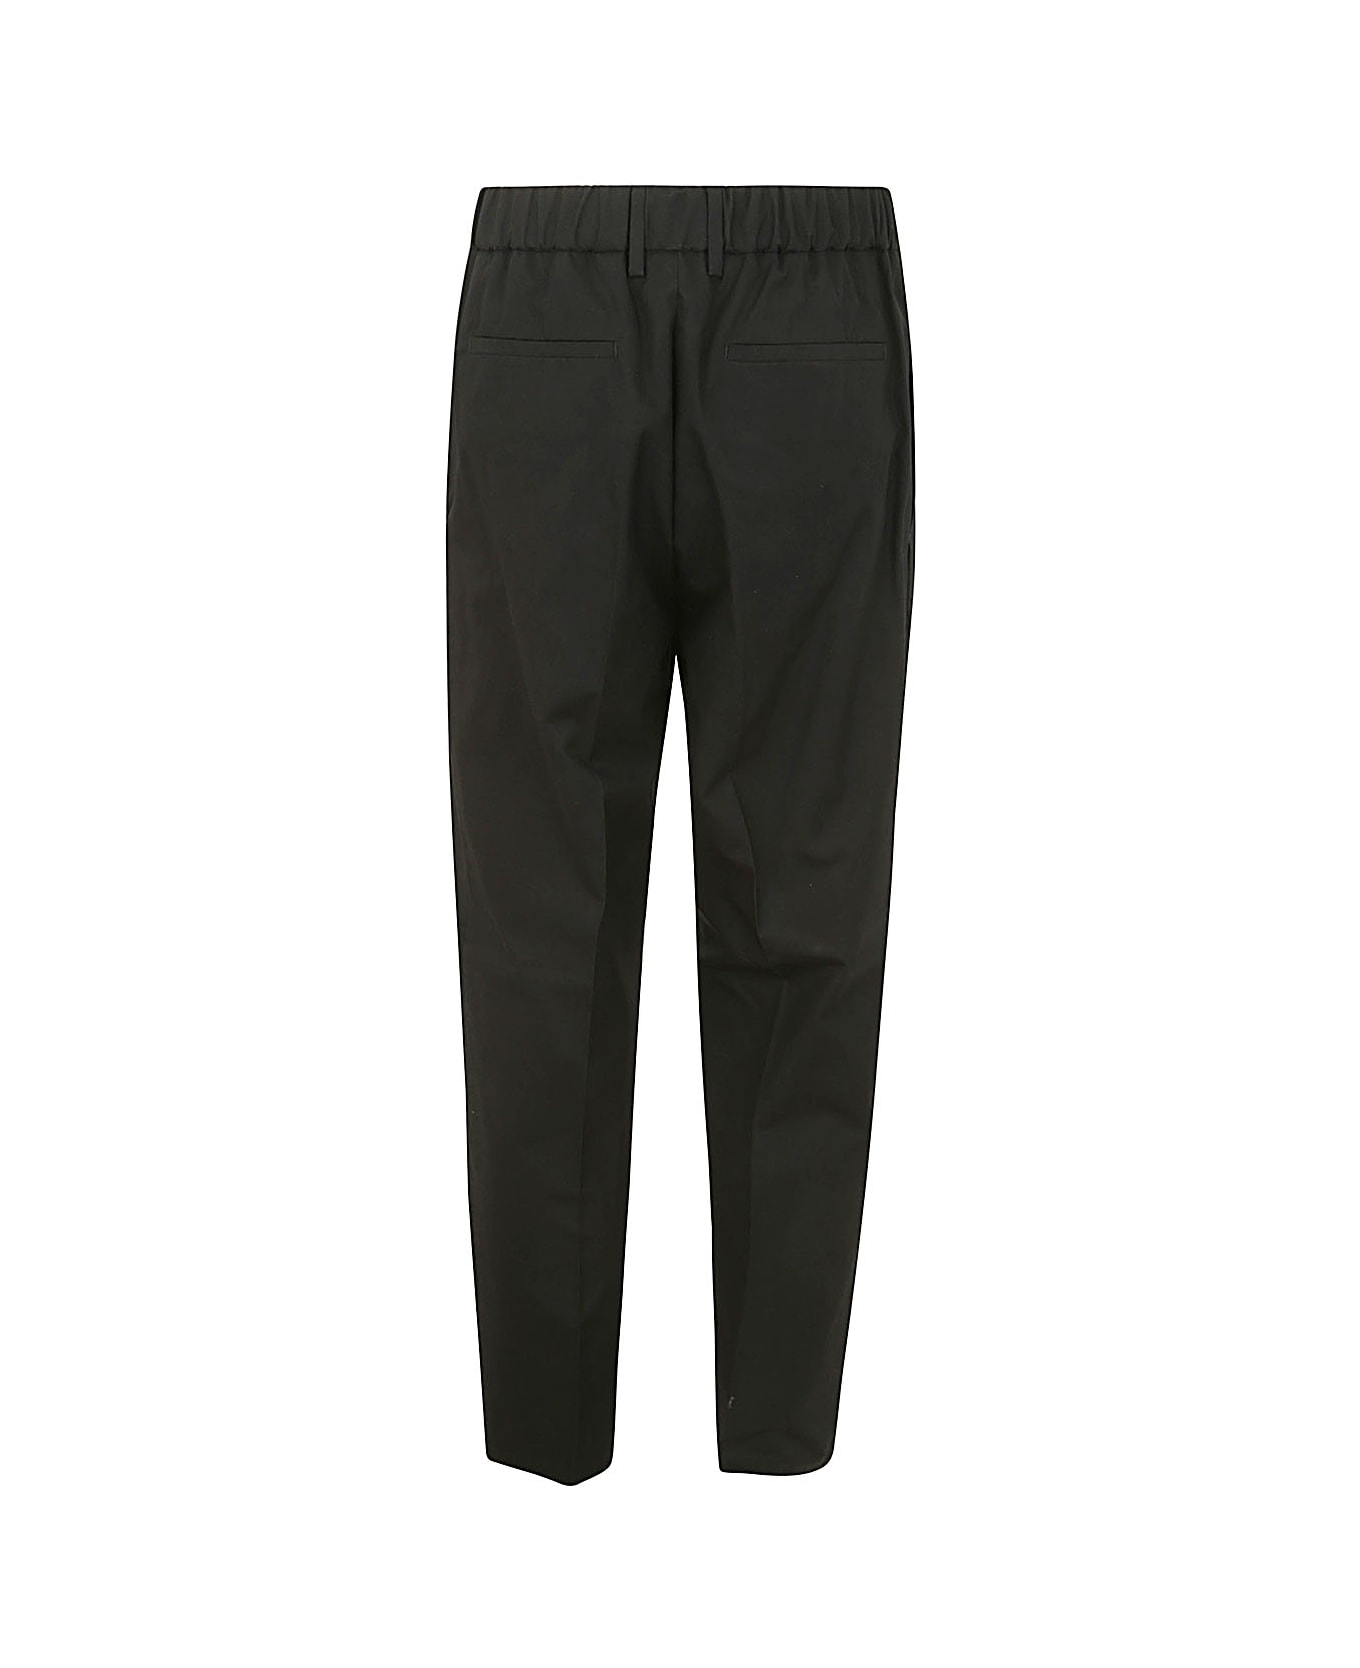 Jil Sander D 06 Aw 19 Relaxed Fit Trousers - Black